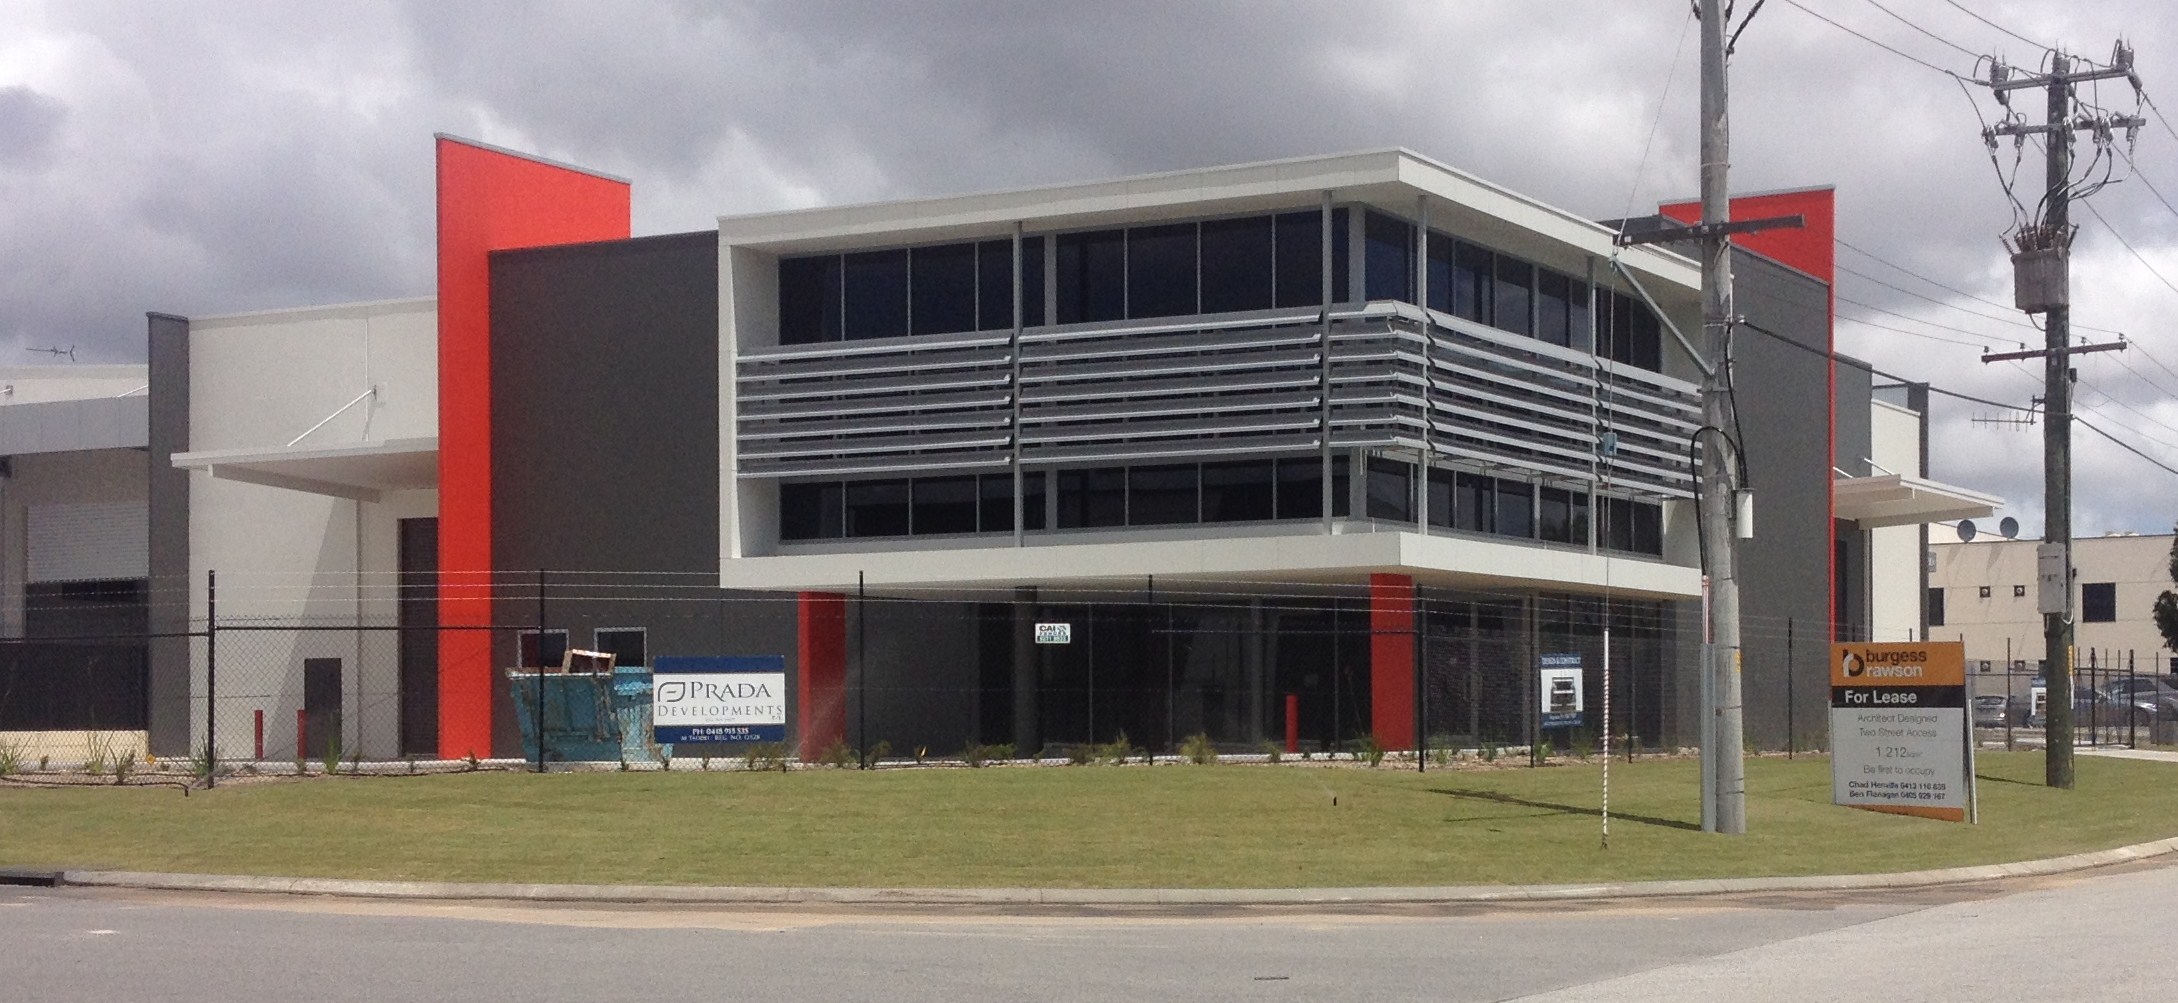 Exterior of commercial office building, finished in dark grey and red paint